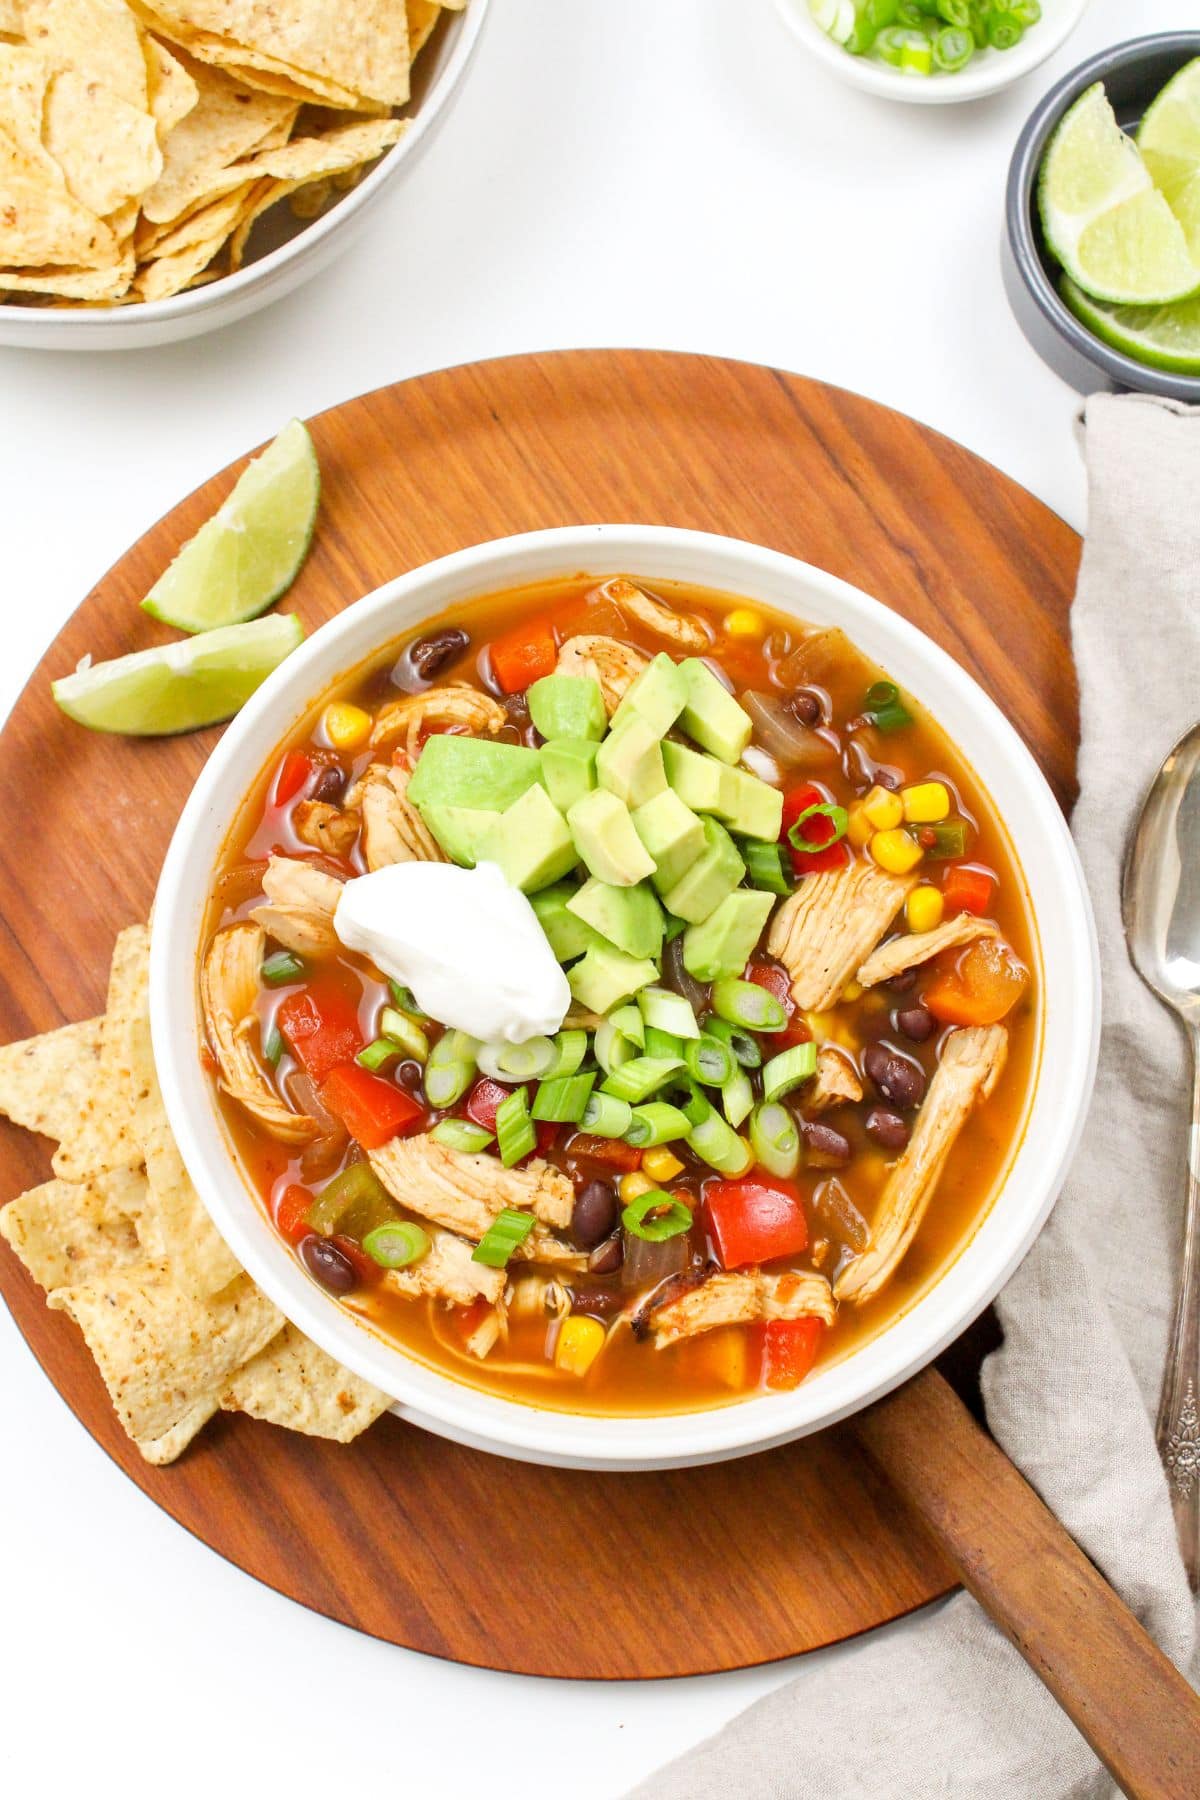 Easy Slow Cooker Taco Soup Recipe With Chicken & Beef - Fun Happy Home